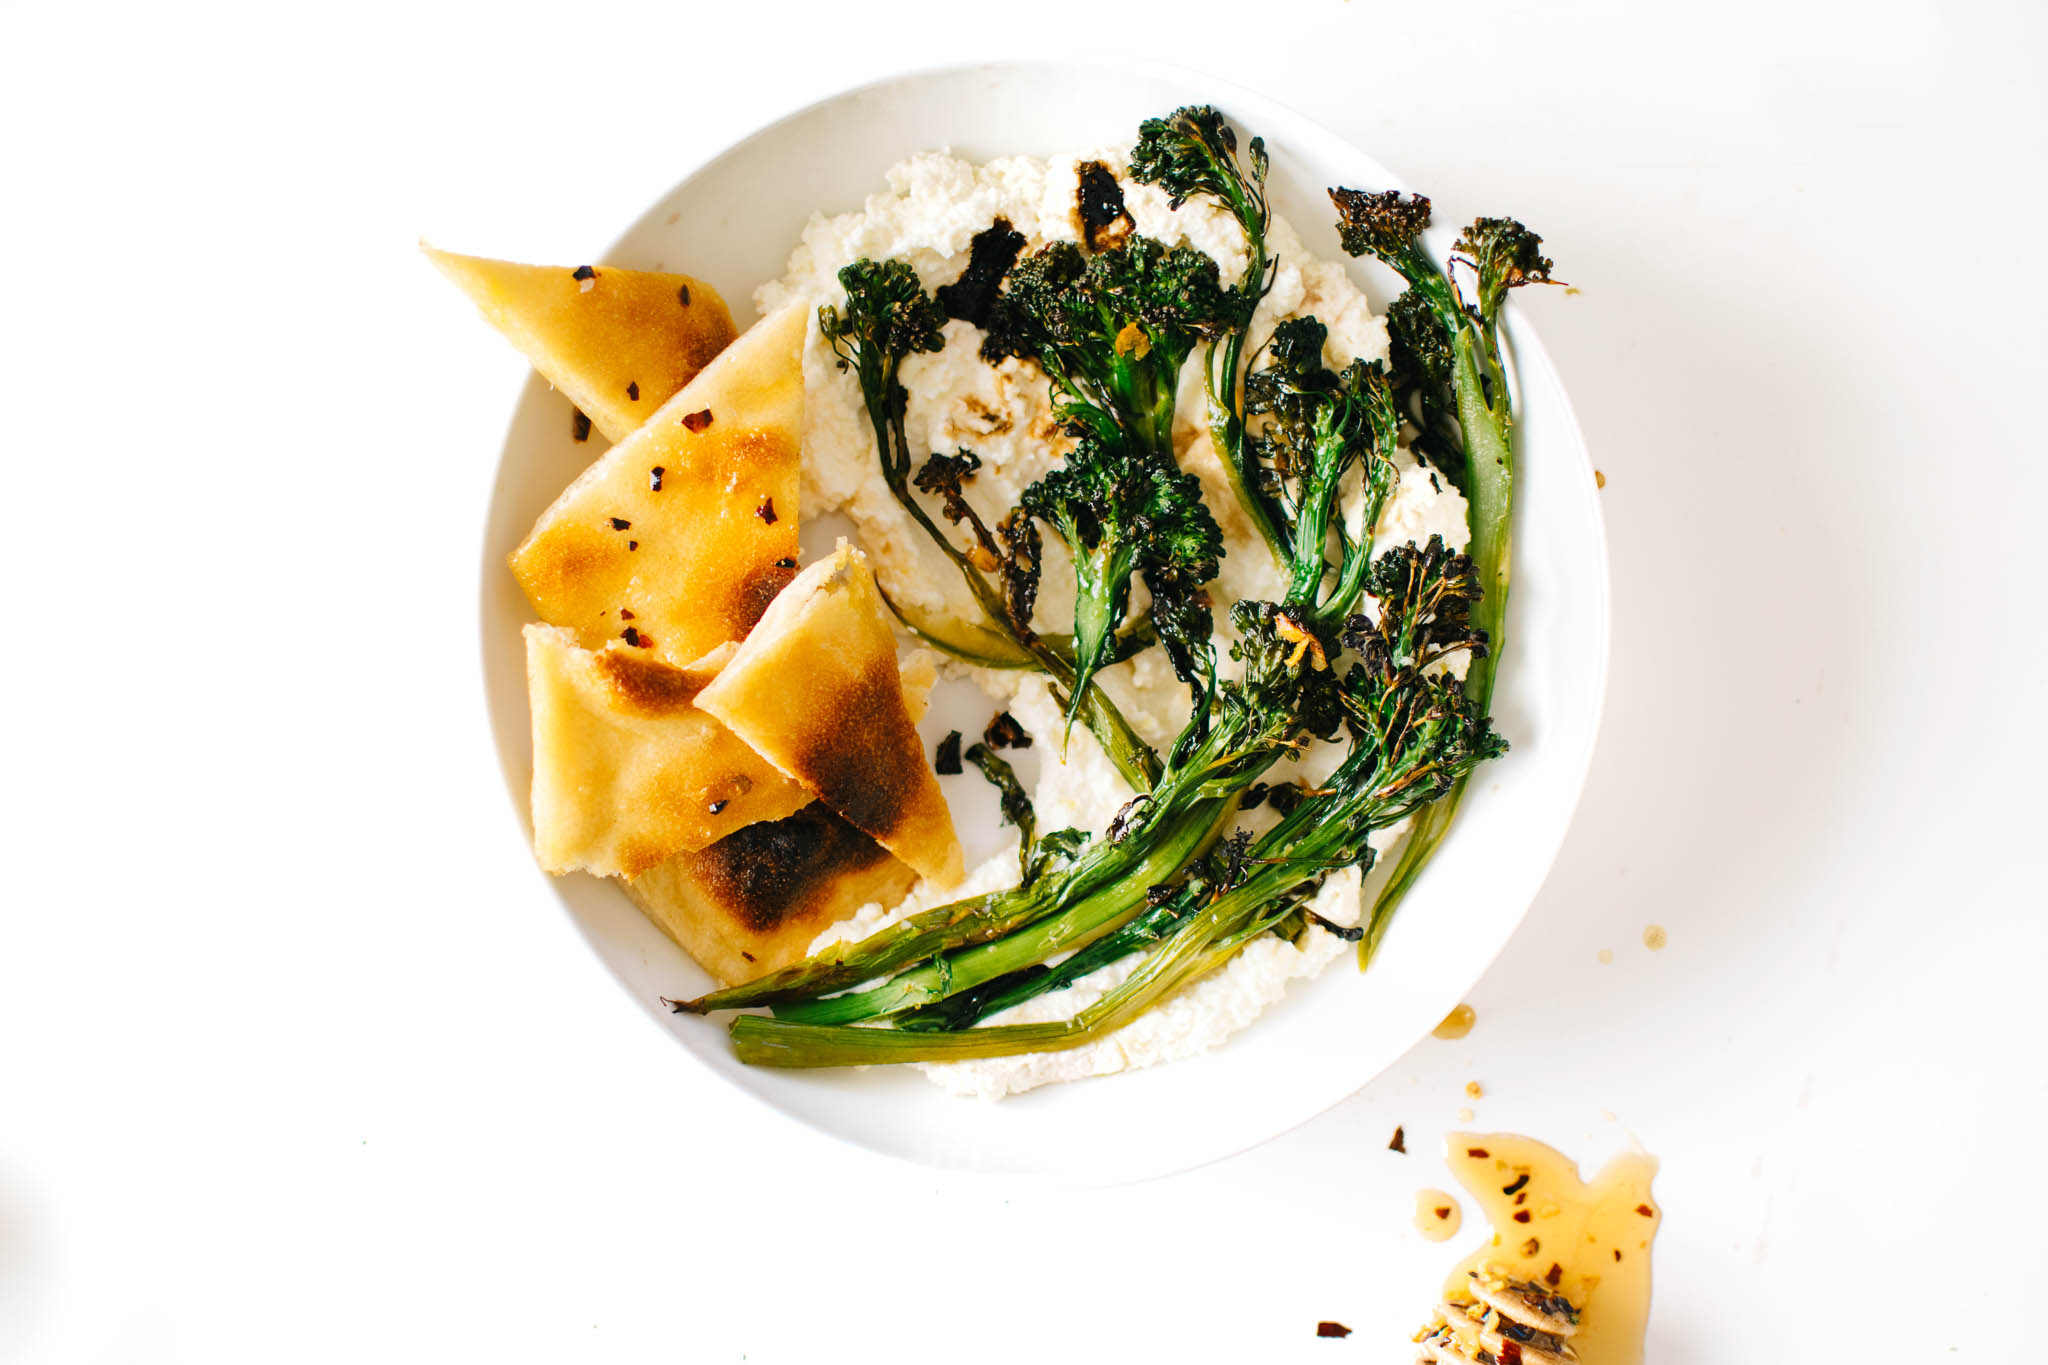 SWEET ‘N’ SPICY CHARRED BROCCOLINI WITH GARLICKY RICOTTA.